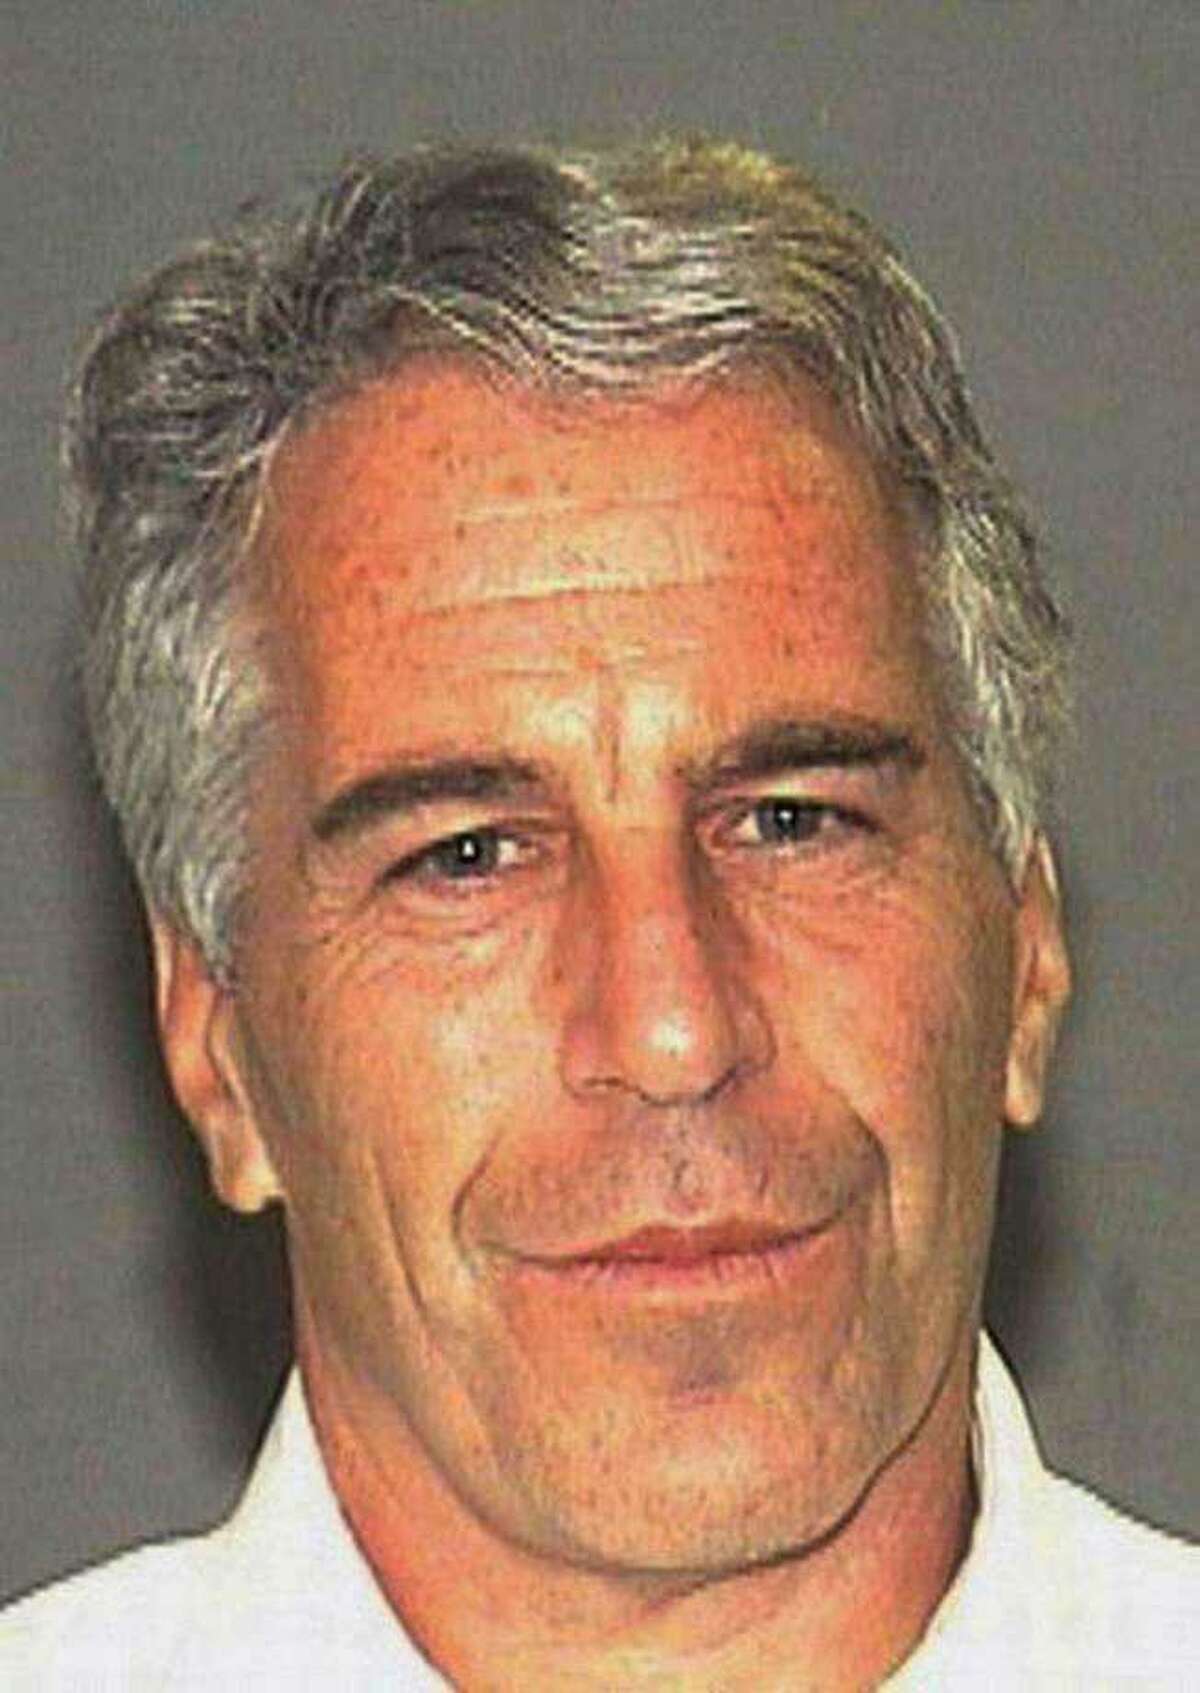 Assistant to Jeffrey Epstein says she was falsely besmirched